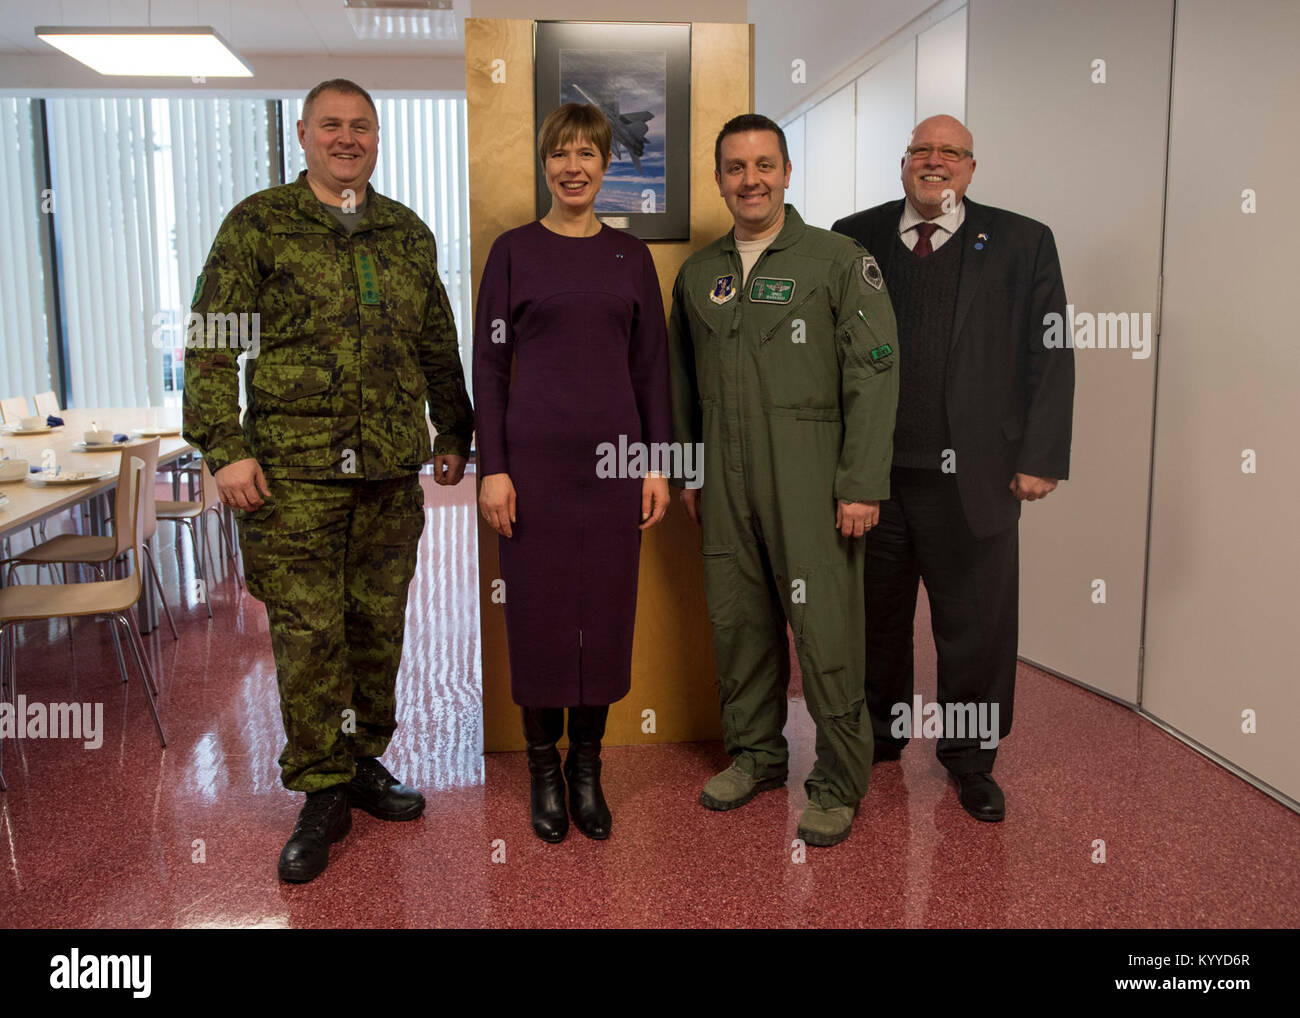 AMARI AIR BASE, ESTONIA (Jan. 10, 2018) – General Riho Terras, commander of the Estonian Defence Forces, H.E. Mrs. Kersti Kaljulaid, President of the Republic of Estonia, Lt. Col. Greg Barasch, 112th EFS commander, and Ambassador James D. Melville Jr., U.S. Ambassador to Estonia, pose January 10, 2018 after a luncheon at Amari, Air Base, Estonia. They discussed the Ohio Air National Guard’s participation in the theater security package, and the strong U.S.-Estonian alliance. (DoD Stock Photo